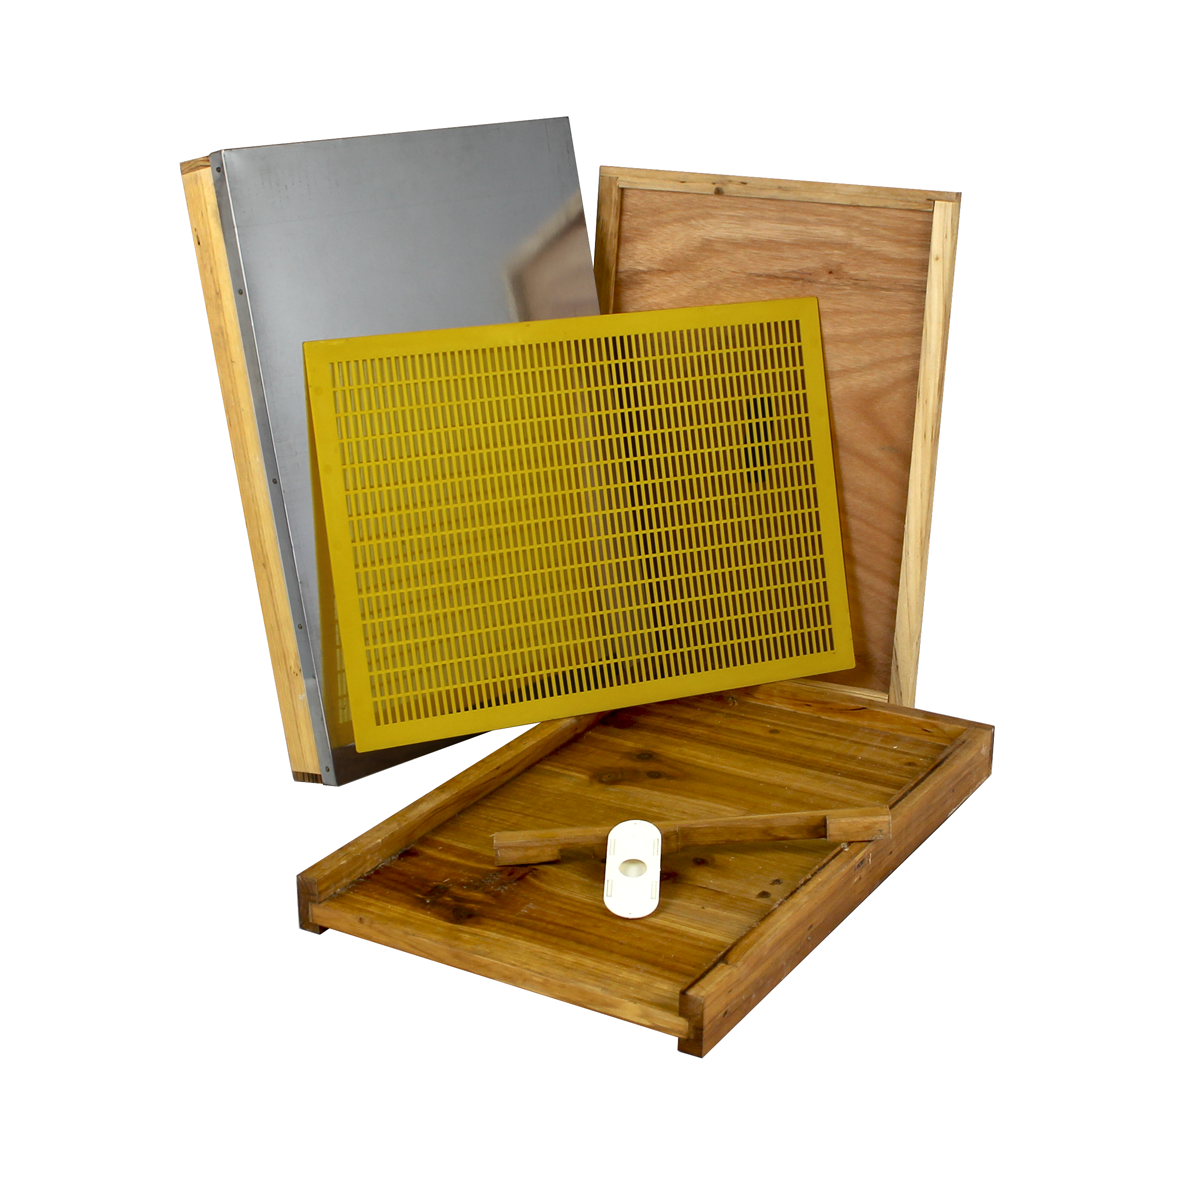 Covers Kit That Includes Telescoping Top Cover, Queen Excluder, Inner Cover, Bottom Board, Entrance Reducer, and Bee Escape